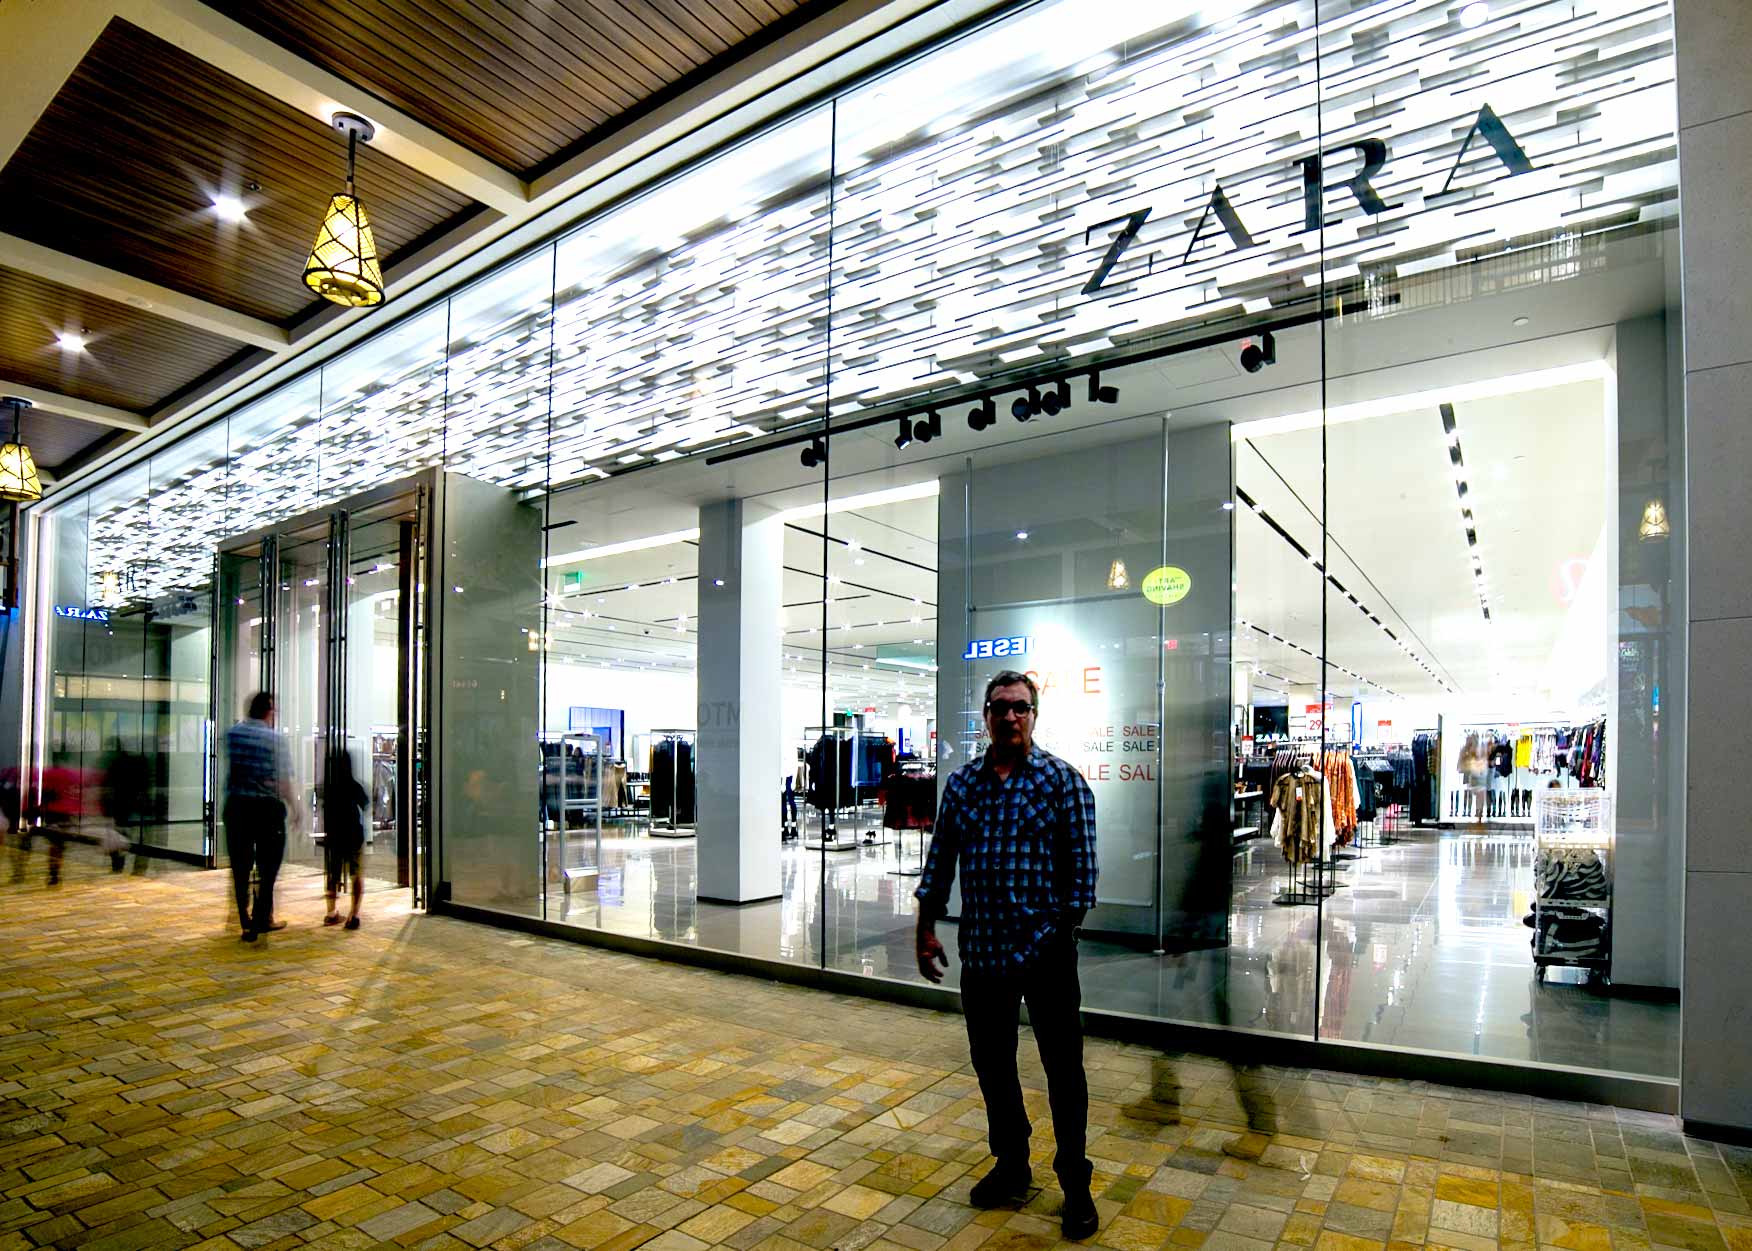 photo: Zara storefront (or mall front) in Hawaii (Oahu)